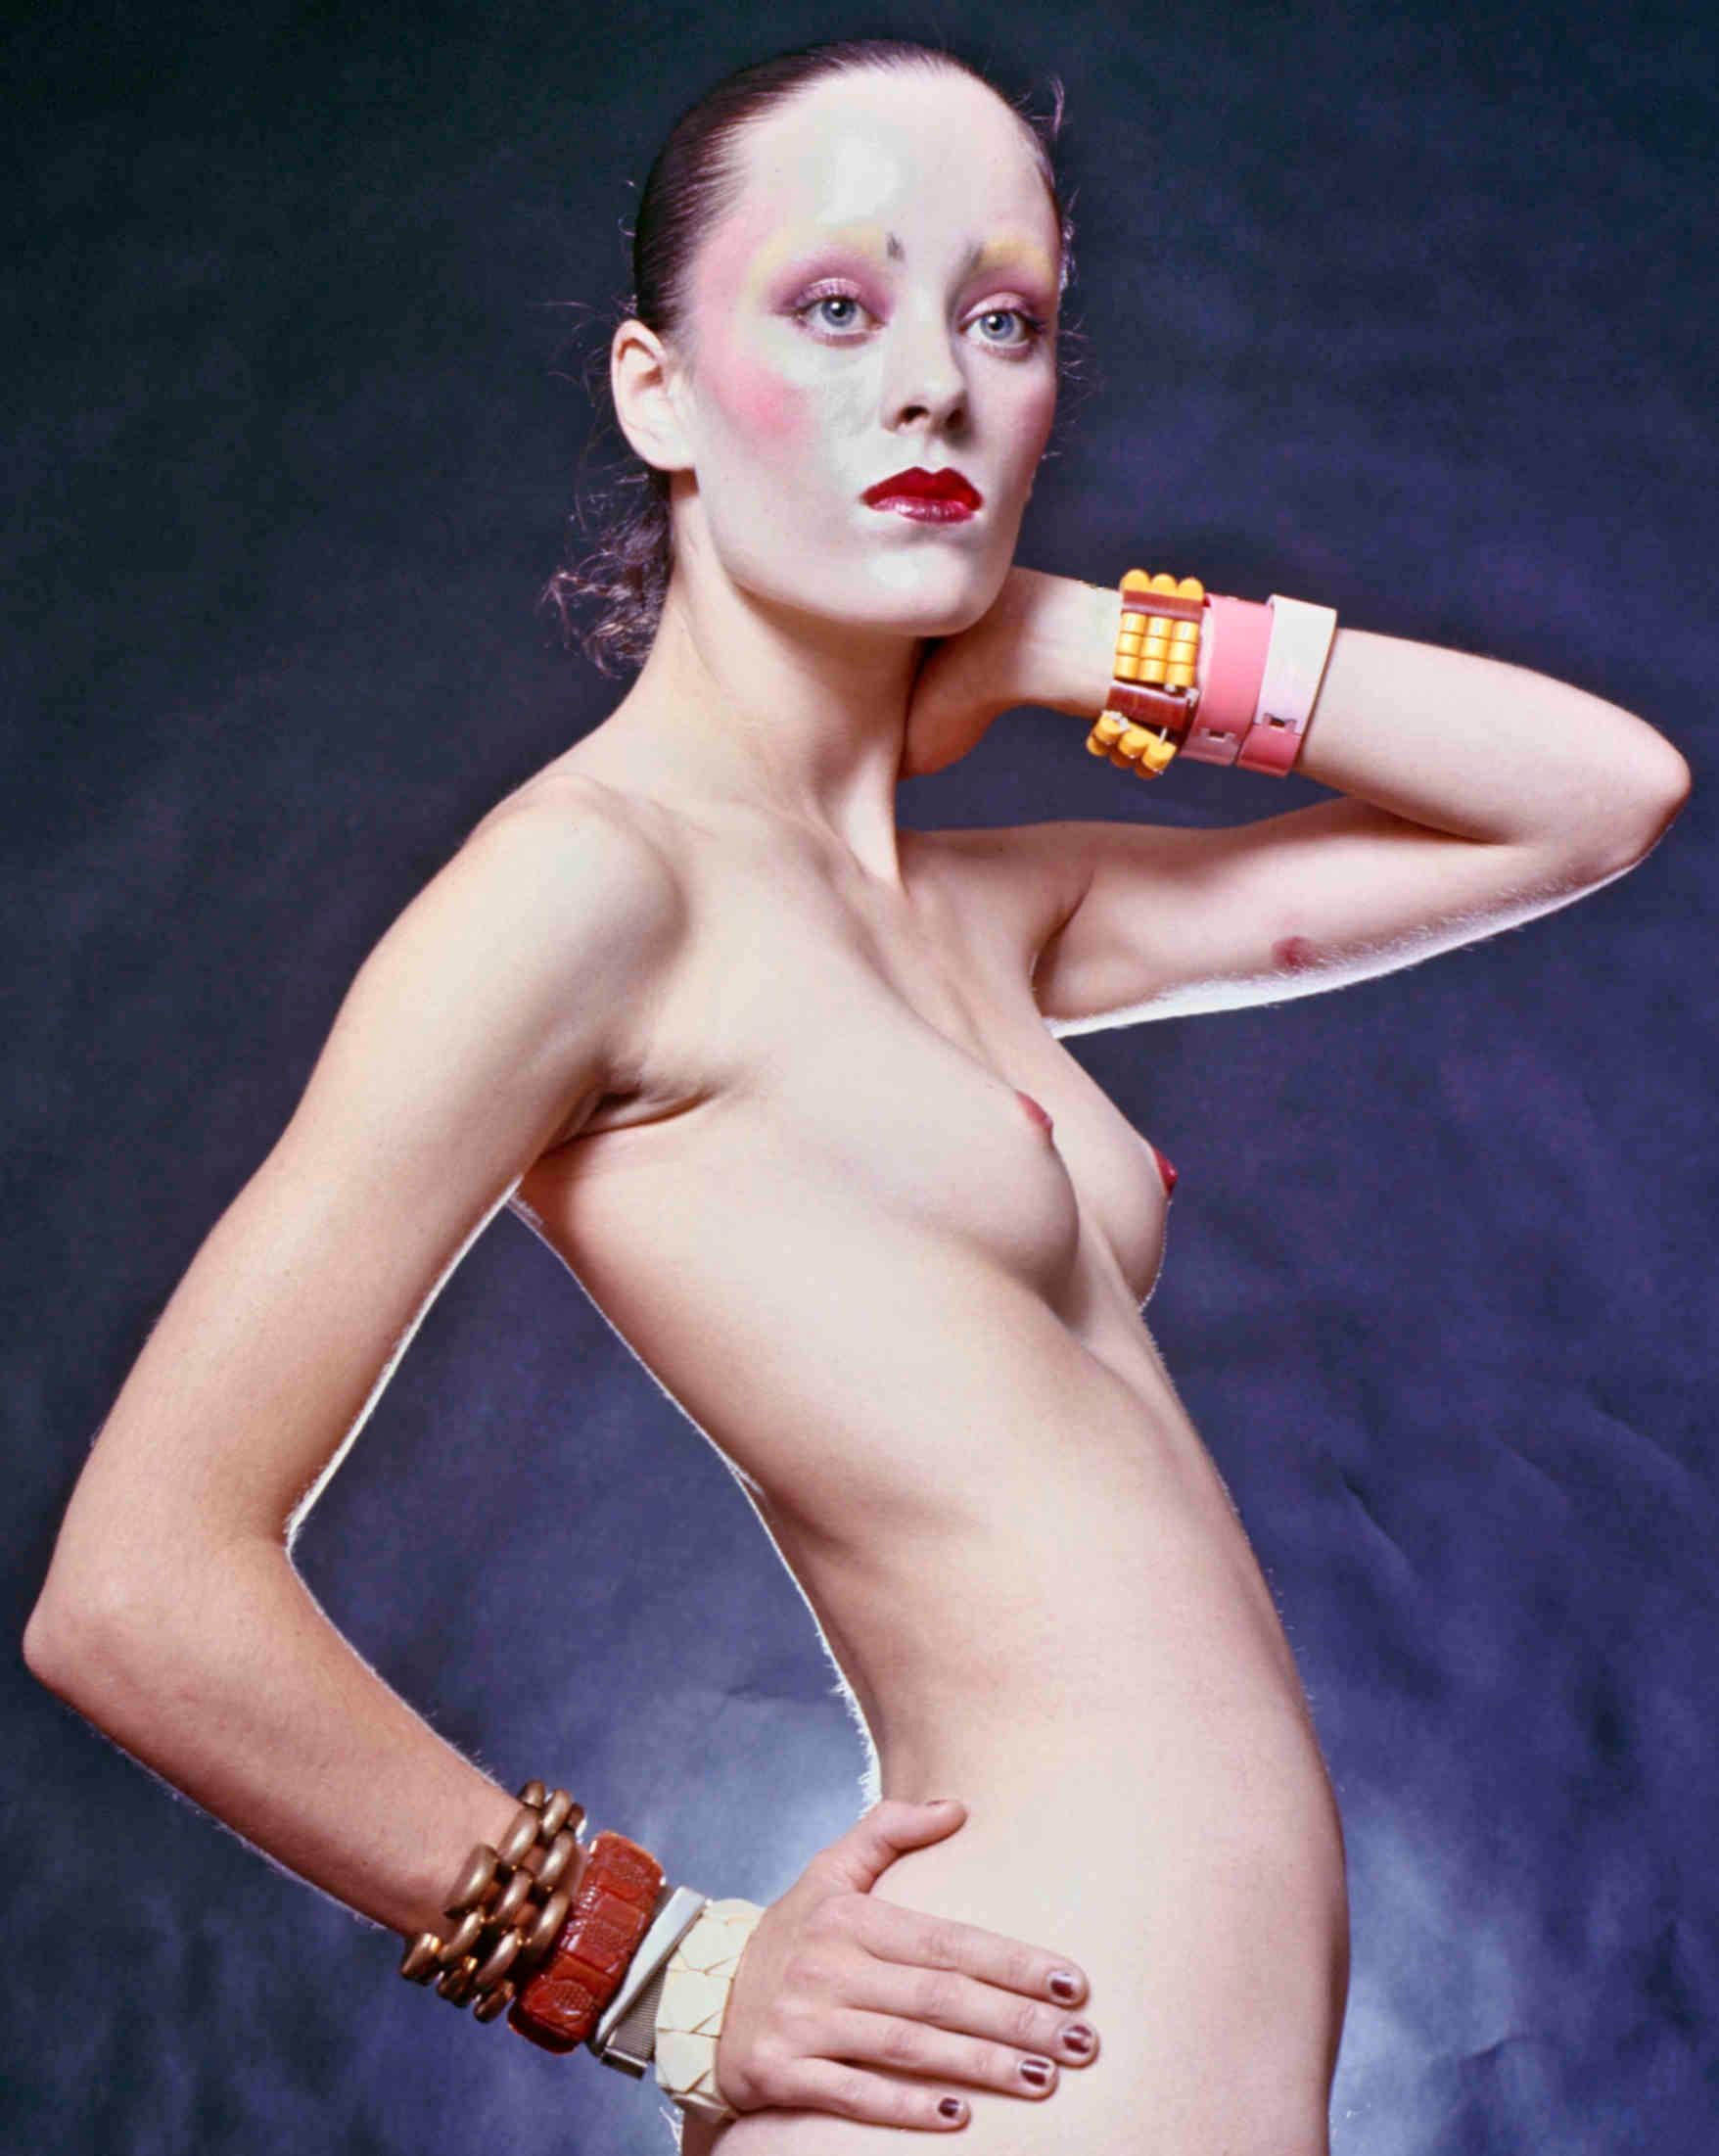 Model & Andy Warhol Superstar Jane Forth photographed nude for Vogue - Photograph by Jack Mitchell